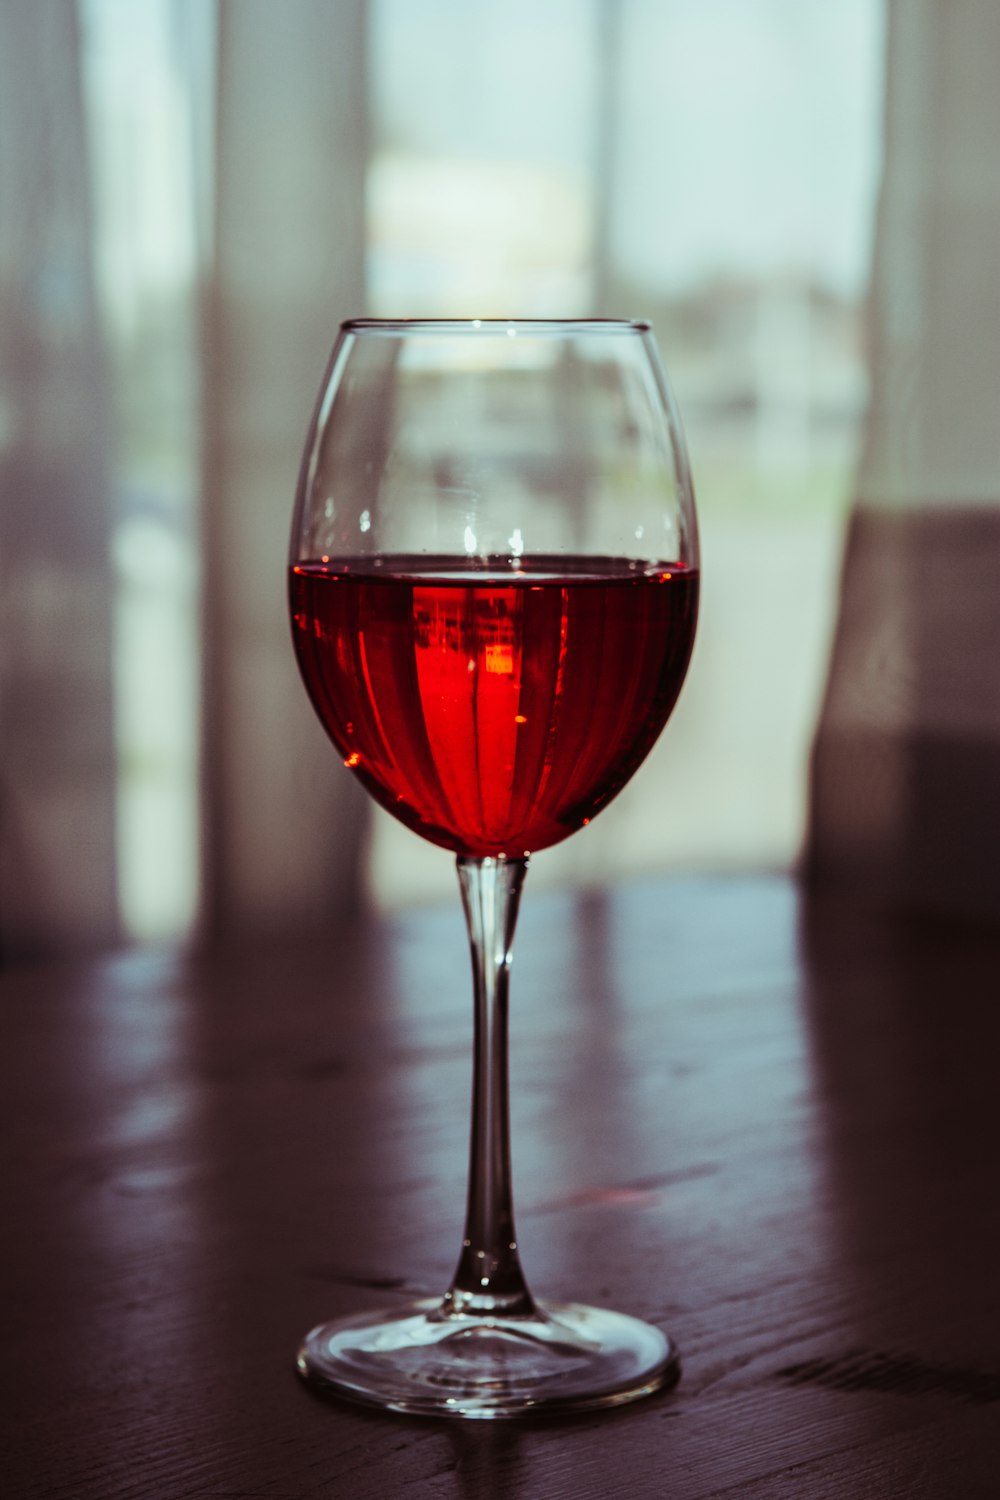 350+ Wine Glass Pictures | Download Free Images & Stock Photos on Unsplash